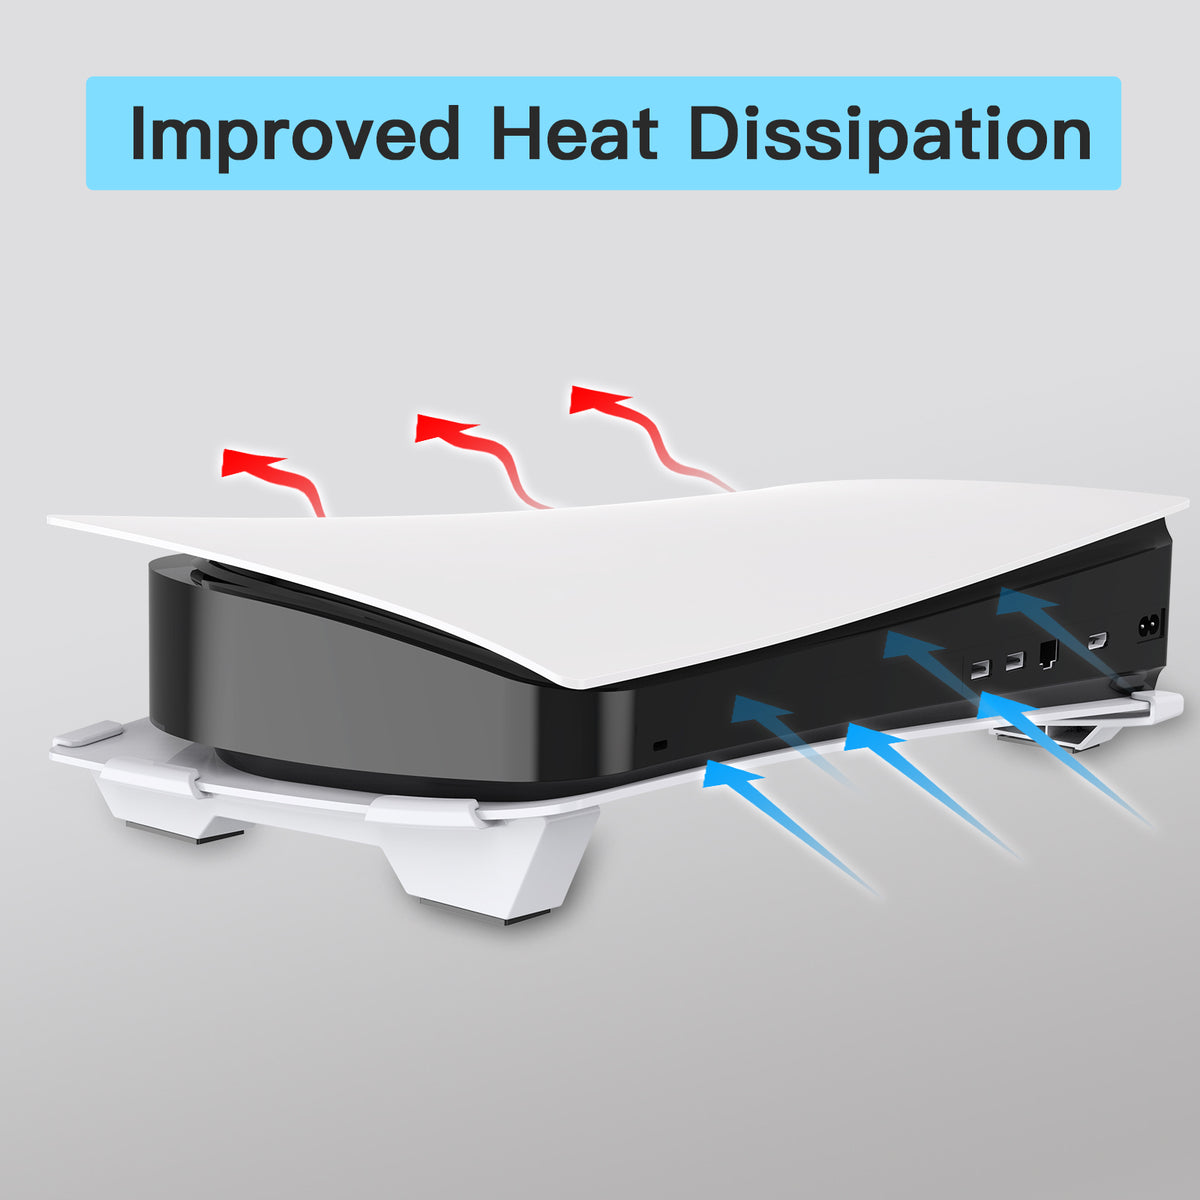 Horizontal stand elevates the console, promoting airflow for better heat dissipation and cooling.